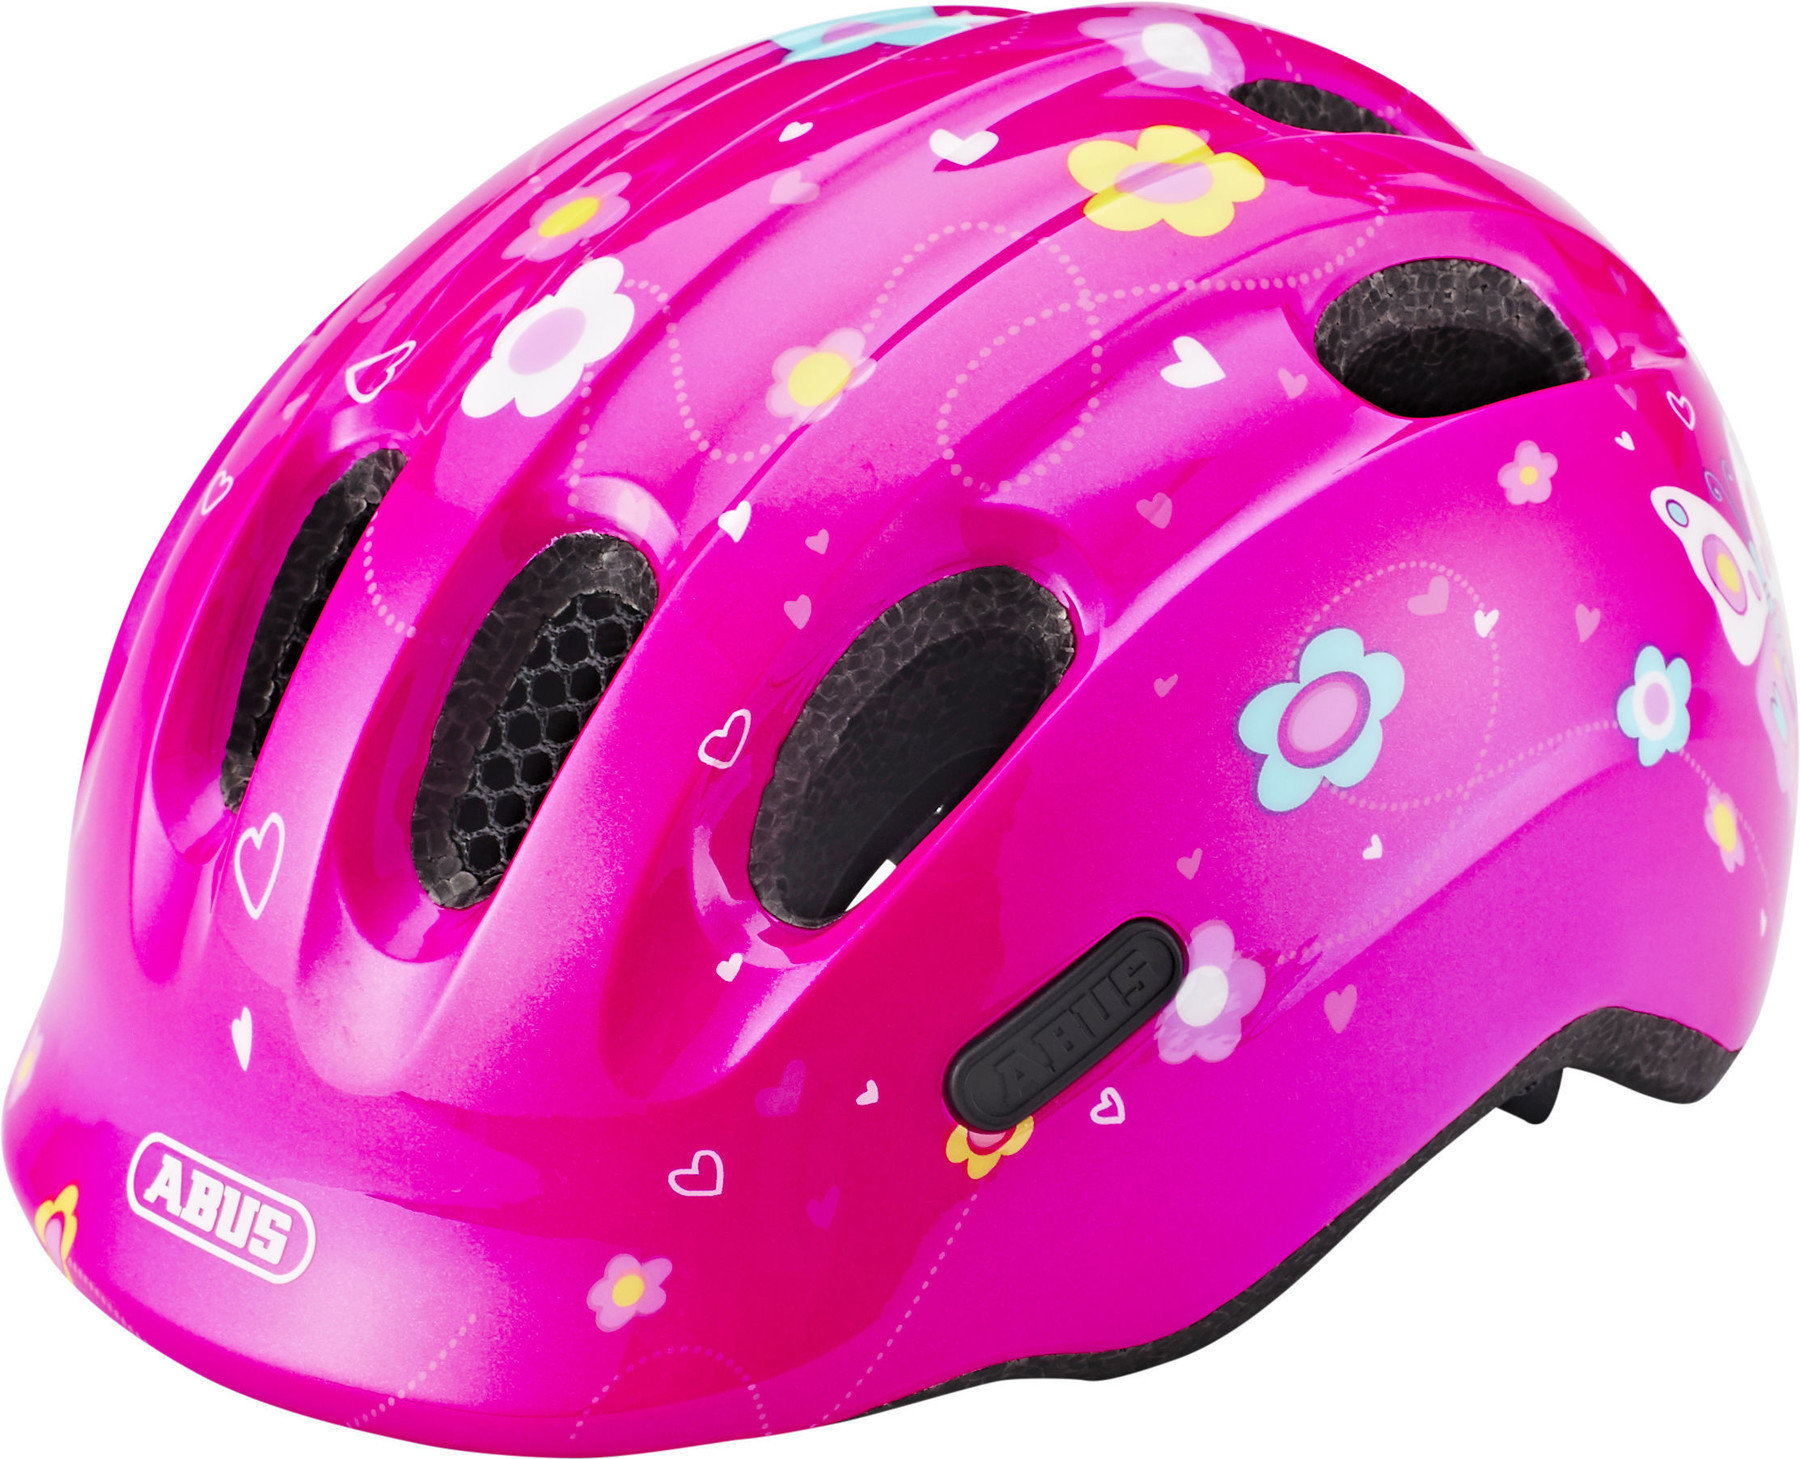 Kinder fahrradhelm Abus Smiley 2.0 Pink Butterfly S Kinder fahrradhelm